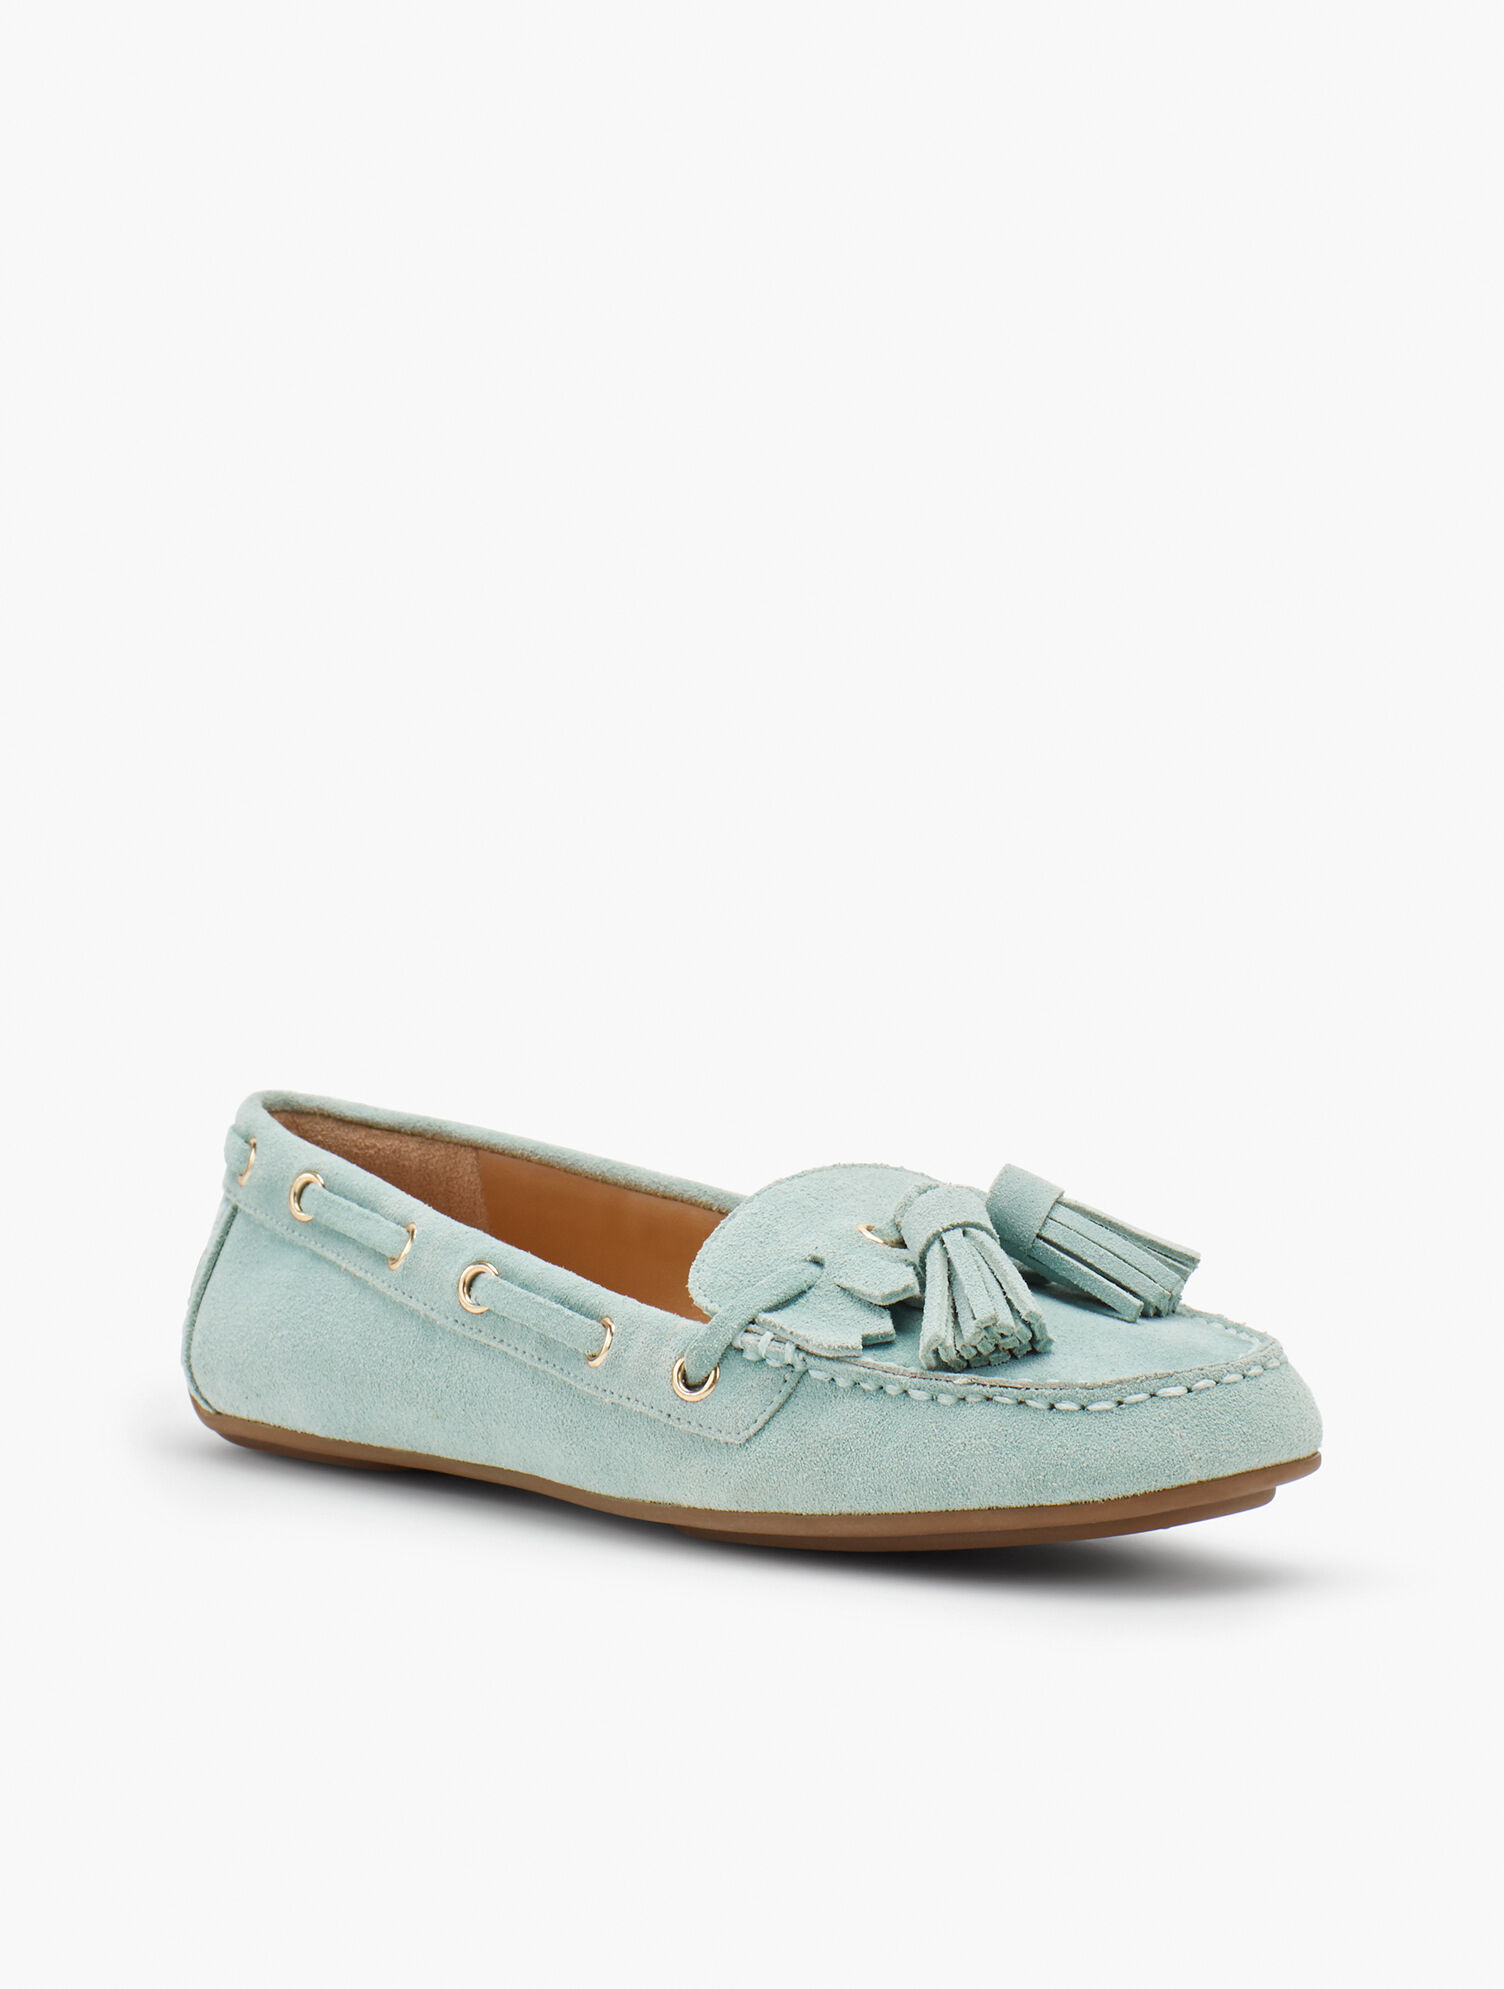 Everson Driving Moccasins - Suede | Talbots